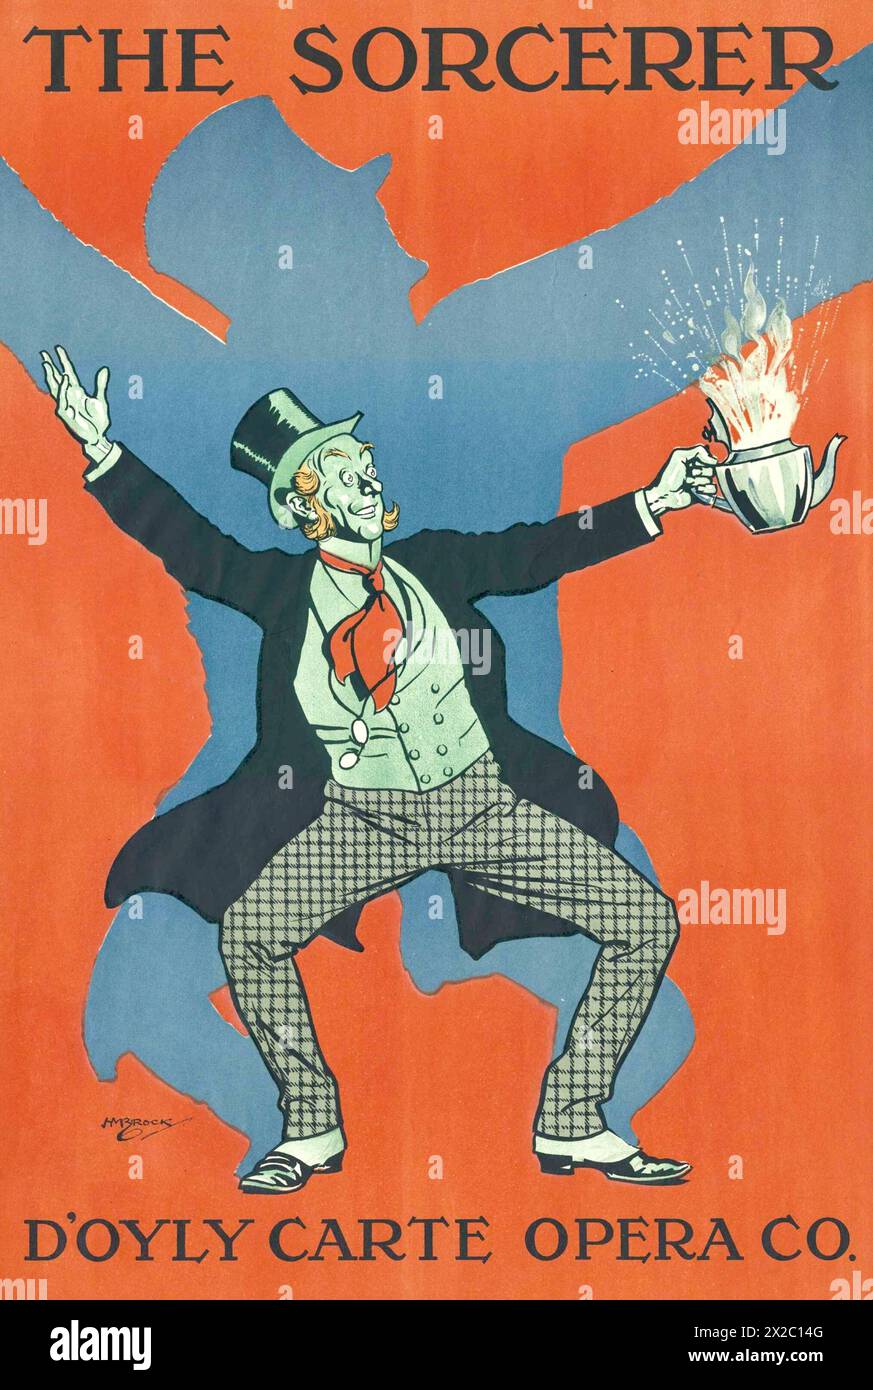 Henry Matthew Brock - Poster for the D'Oyly Carte Opera Company's 1919 production of The Sorcerer by Gilbert and Sullivan Stock Photo